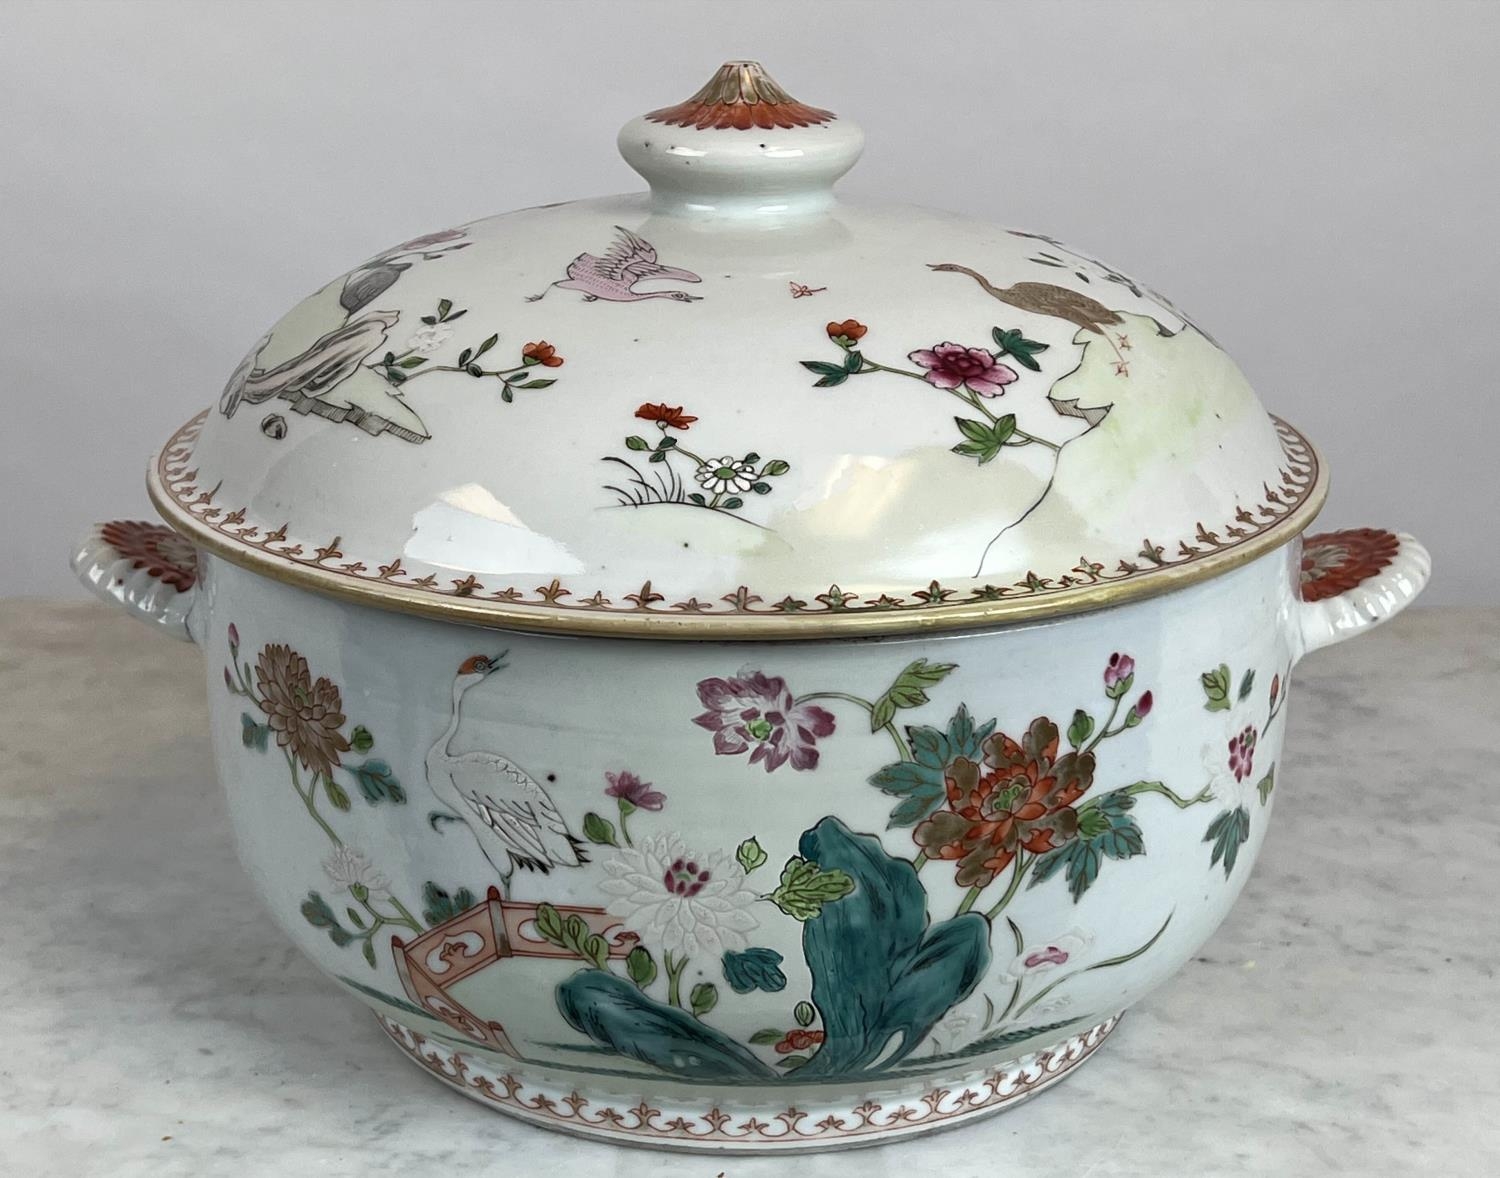 CHINESE EXPORT SOUP TUREEN, 19th century famille rose, decorated with cranes in garden scenes.